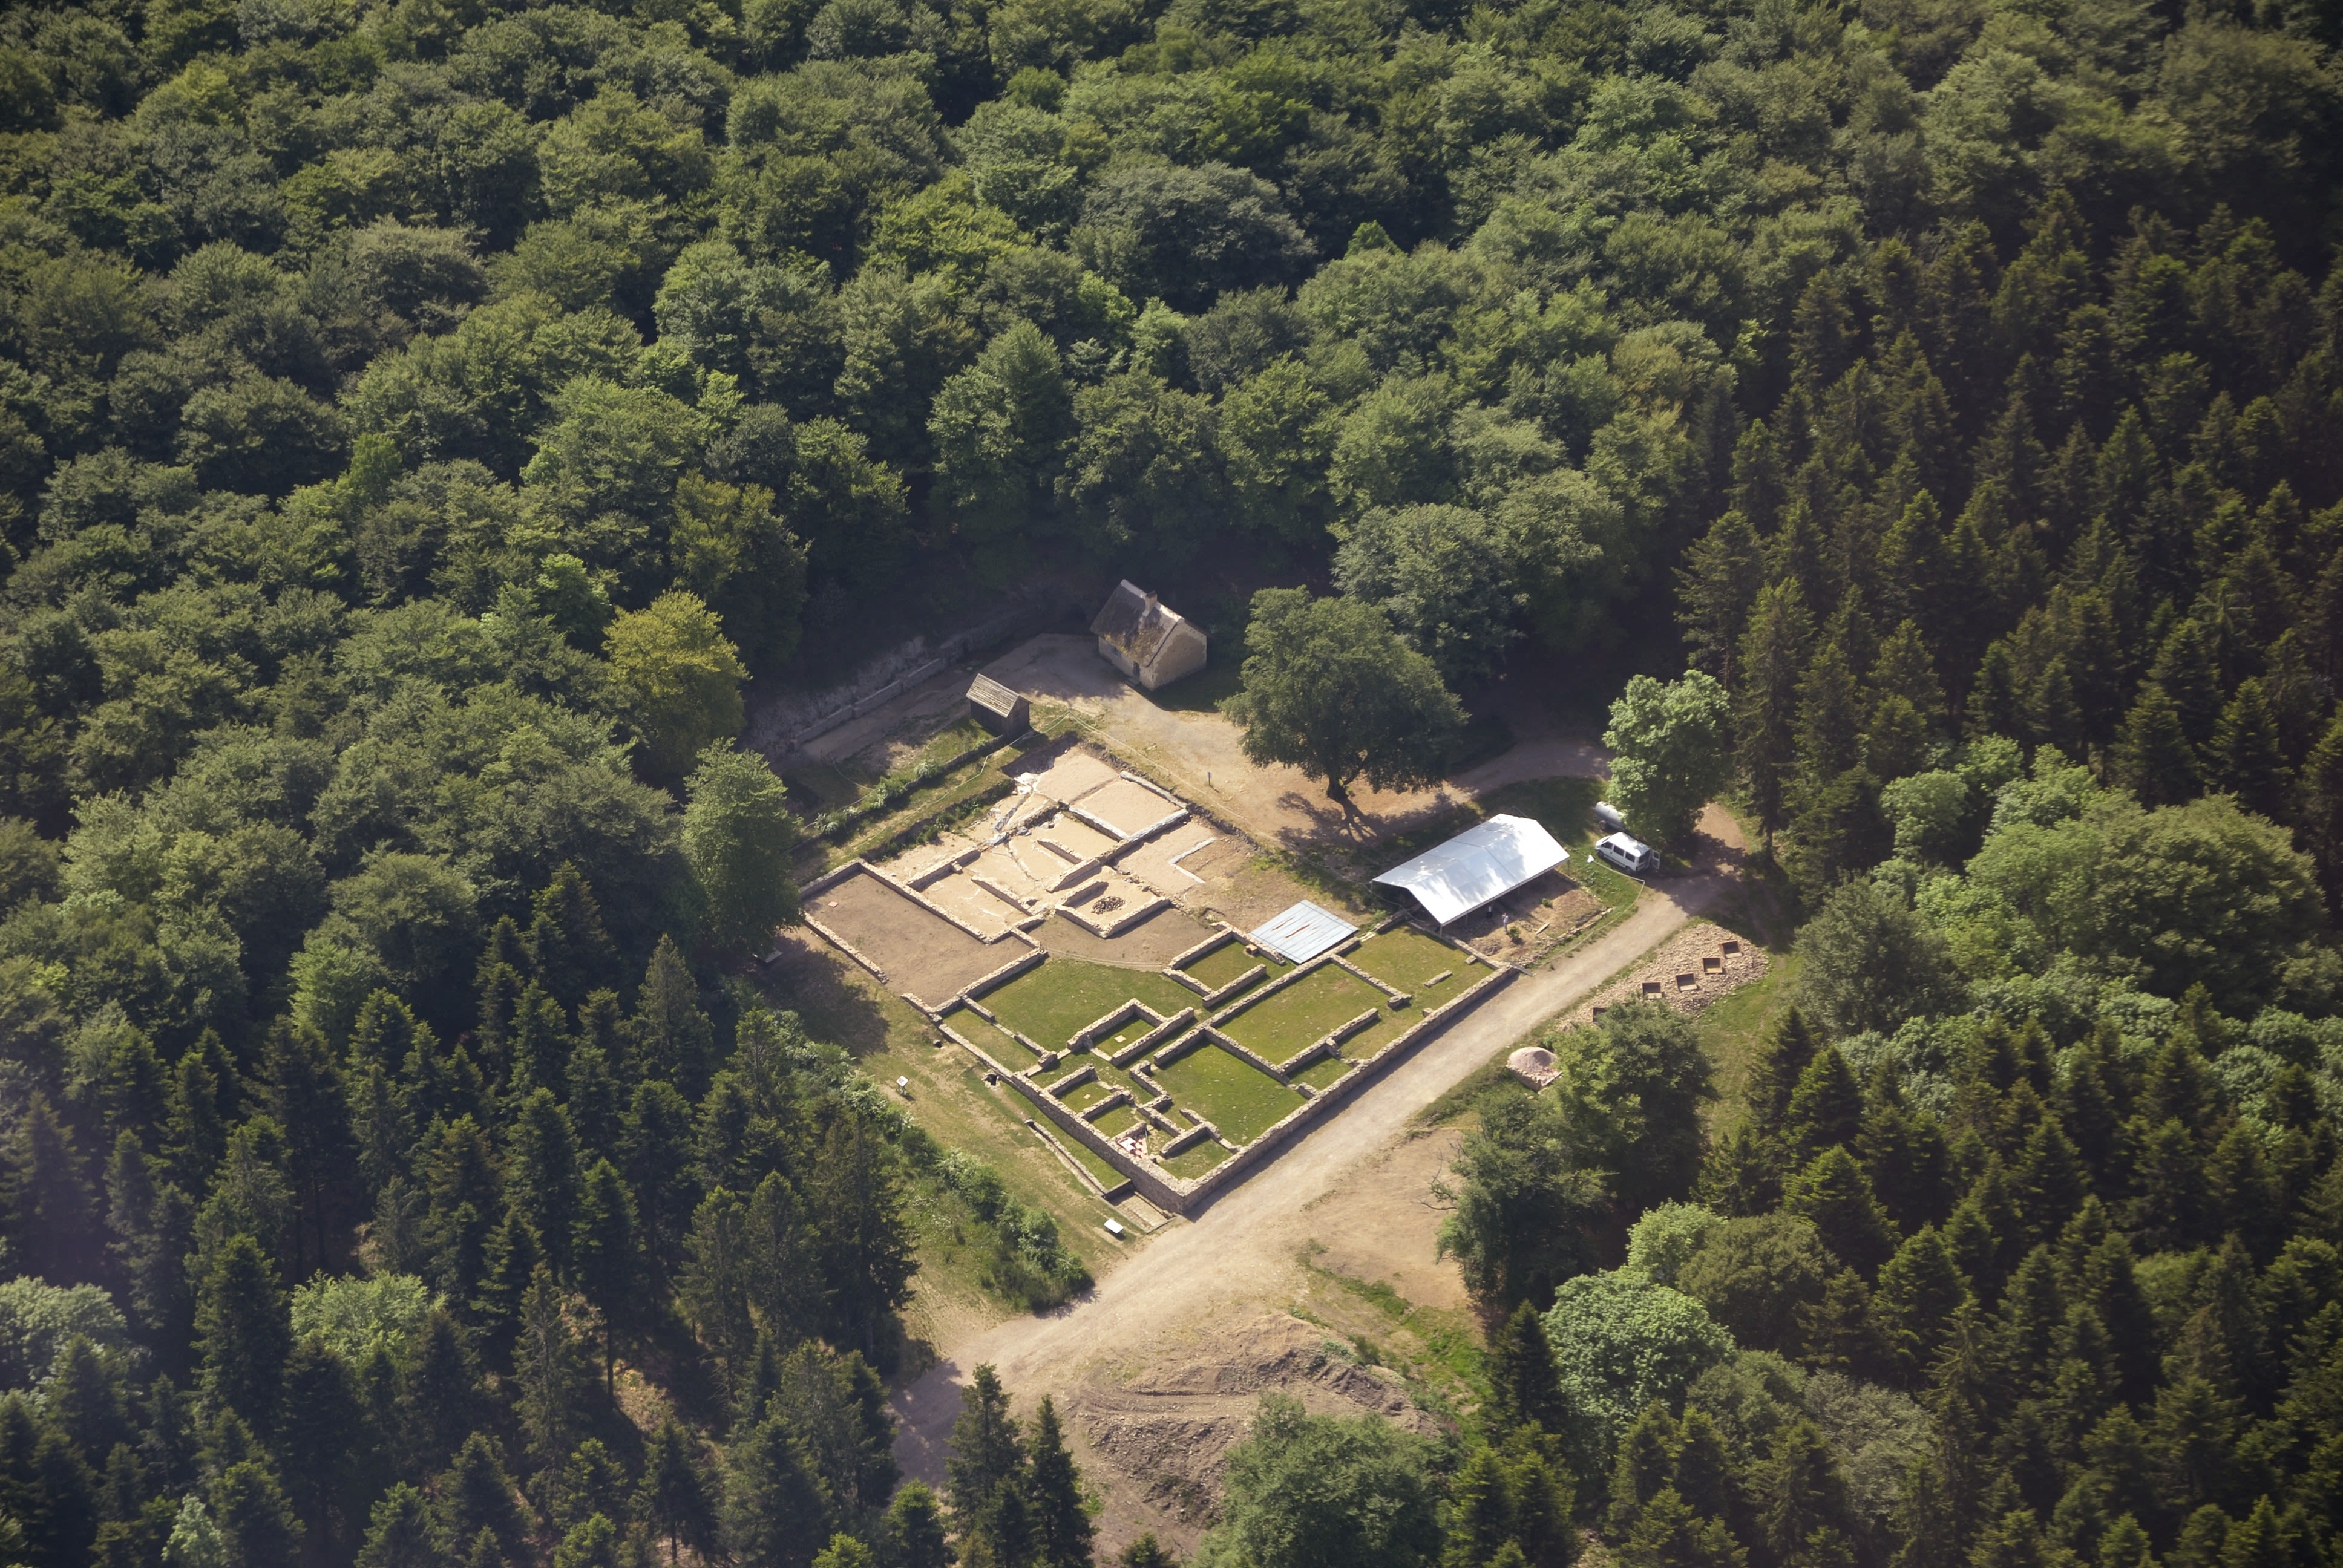 an aerial photograph of an archaeological site, showing the ruined remains of old walls and buildings.